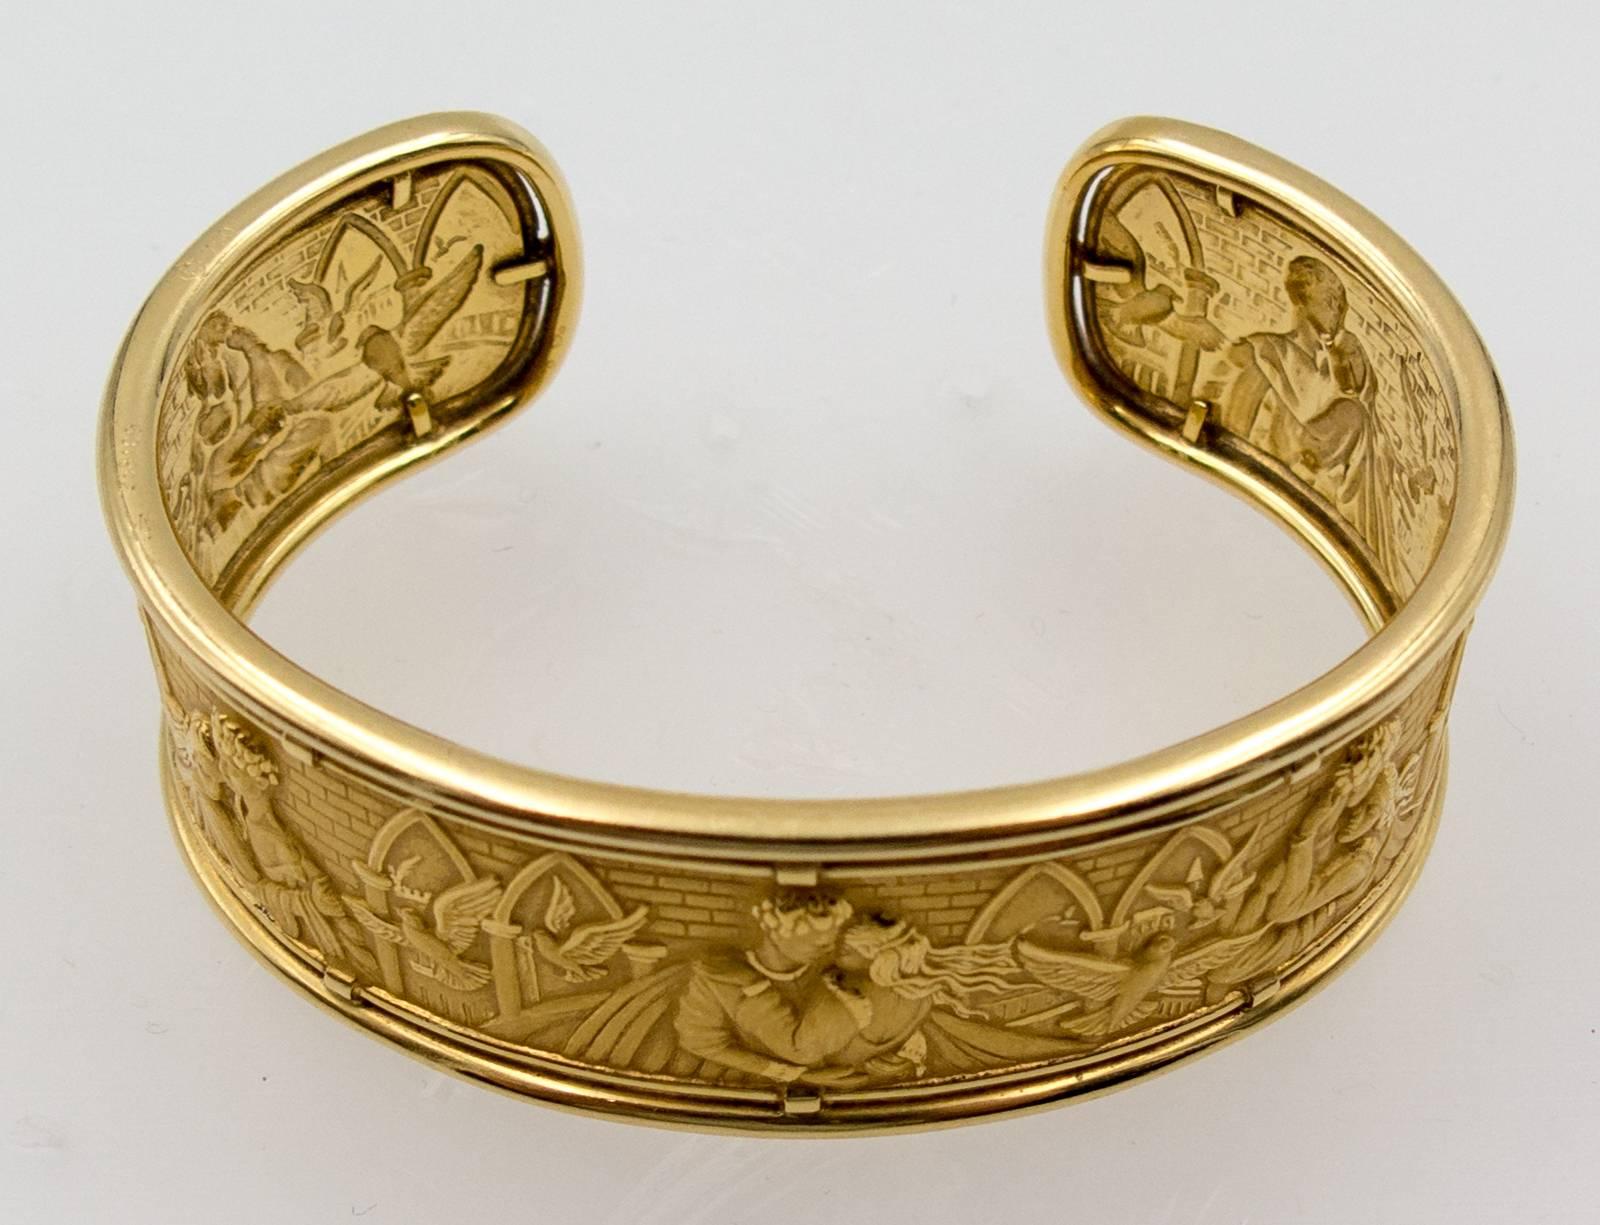 A delightfully romantic cuff bracelet recounting the story of Romeo and Juliet intricately carved into richly pigmented 18 karat yellow gold.  Displaying the precision and attention to detail in all Carrera y Carrera jewels, this elegant cuff